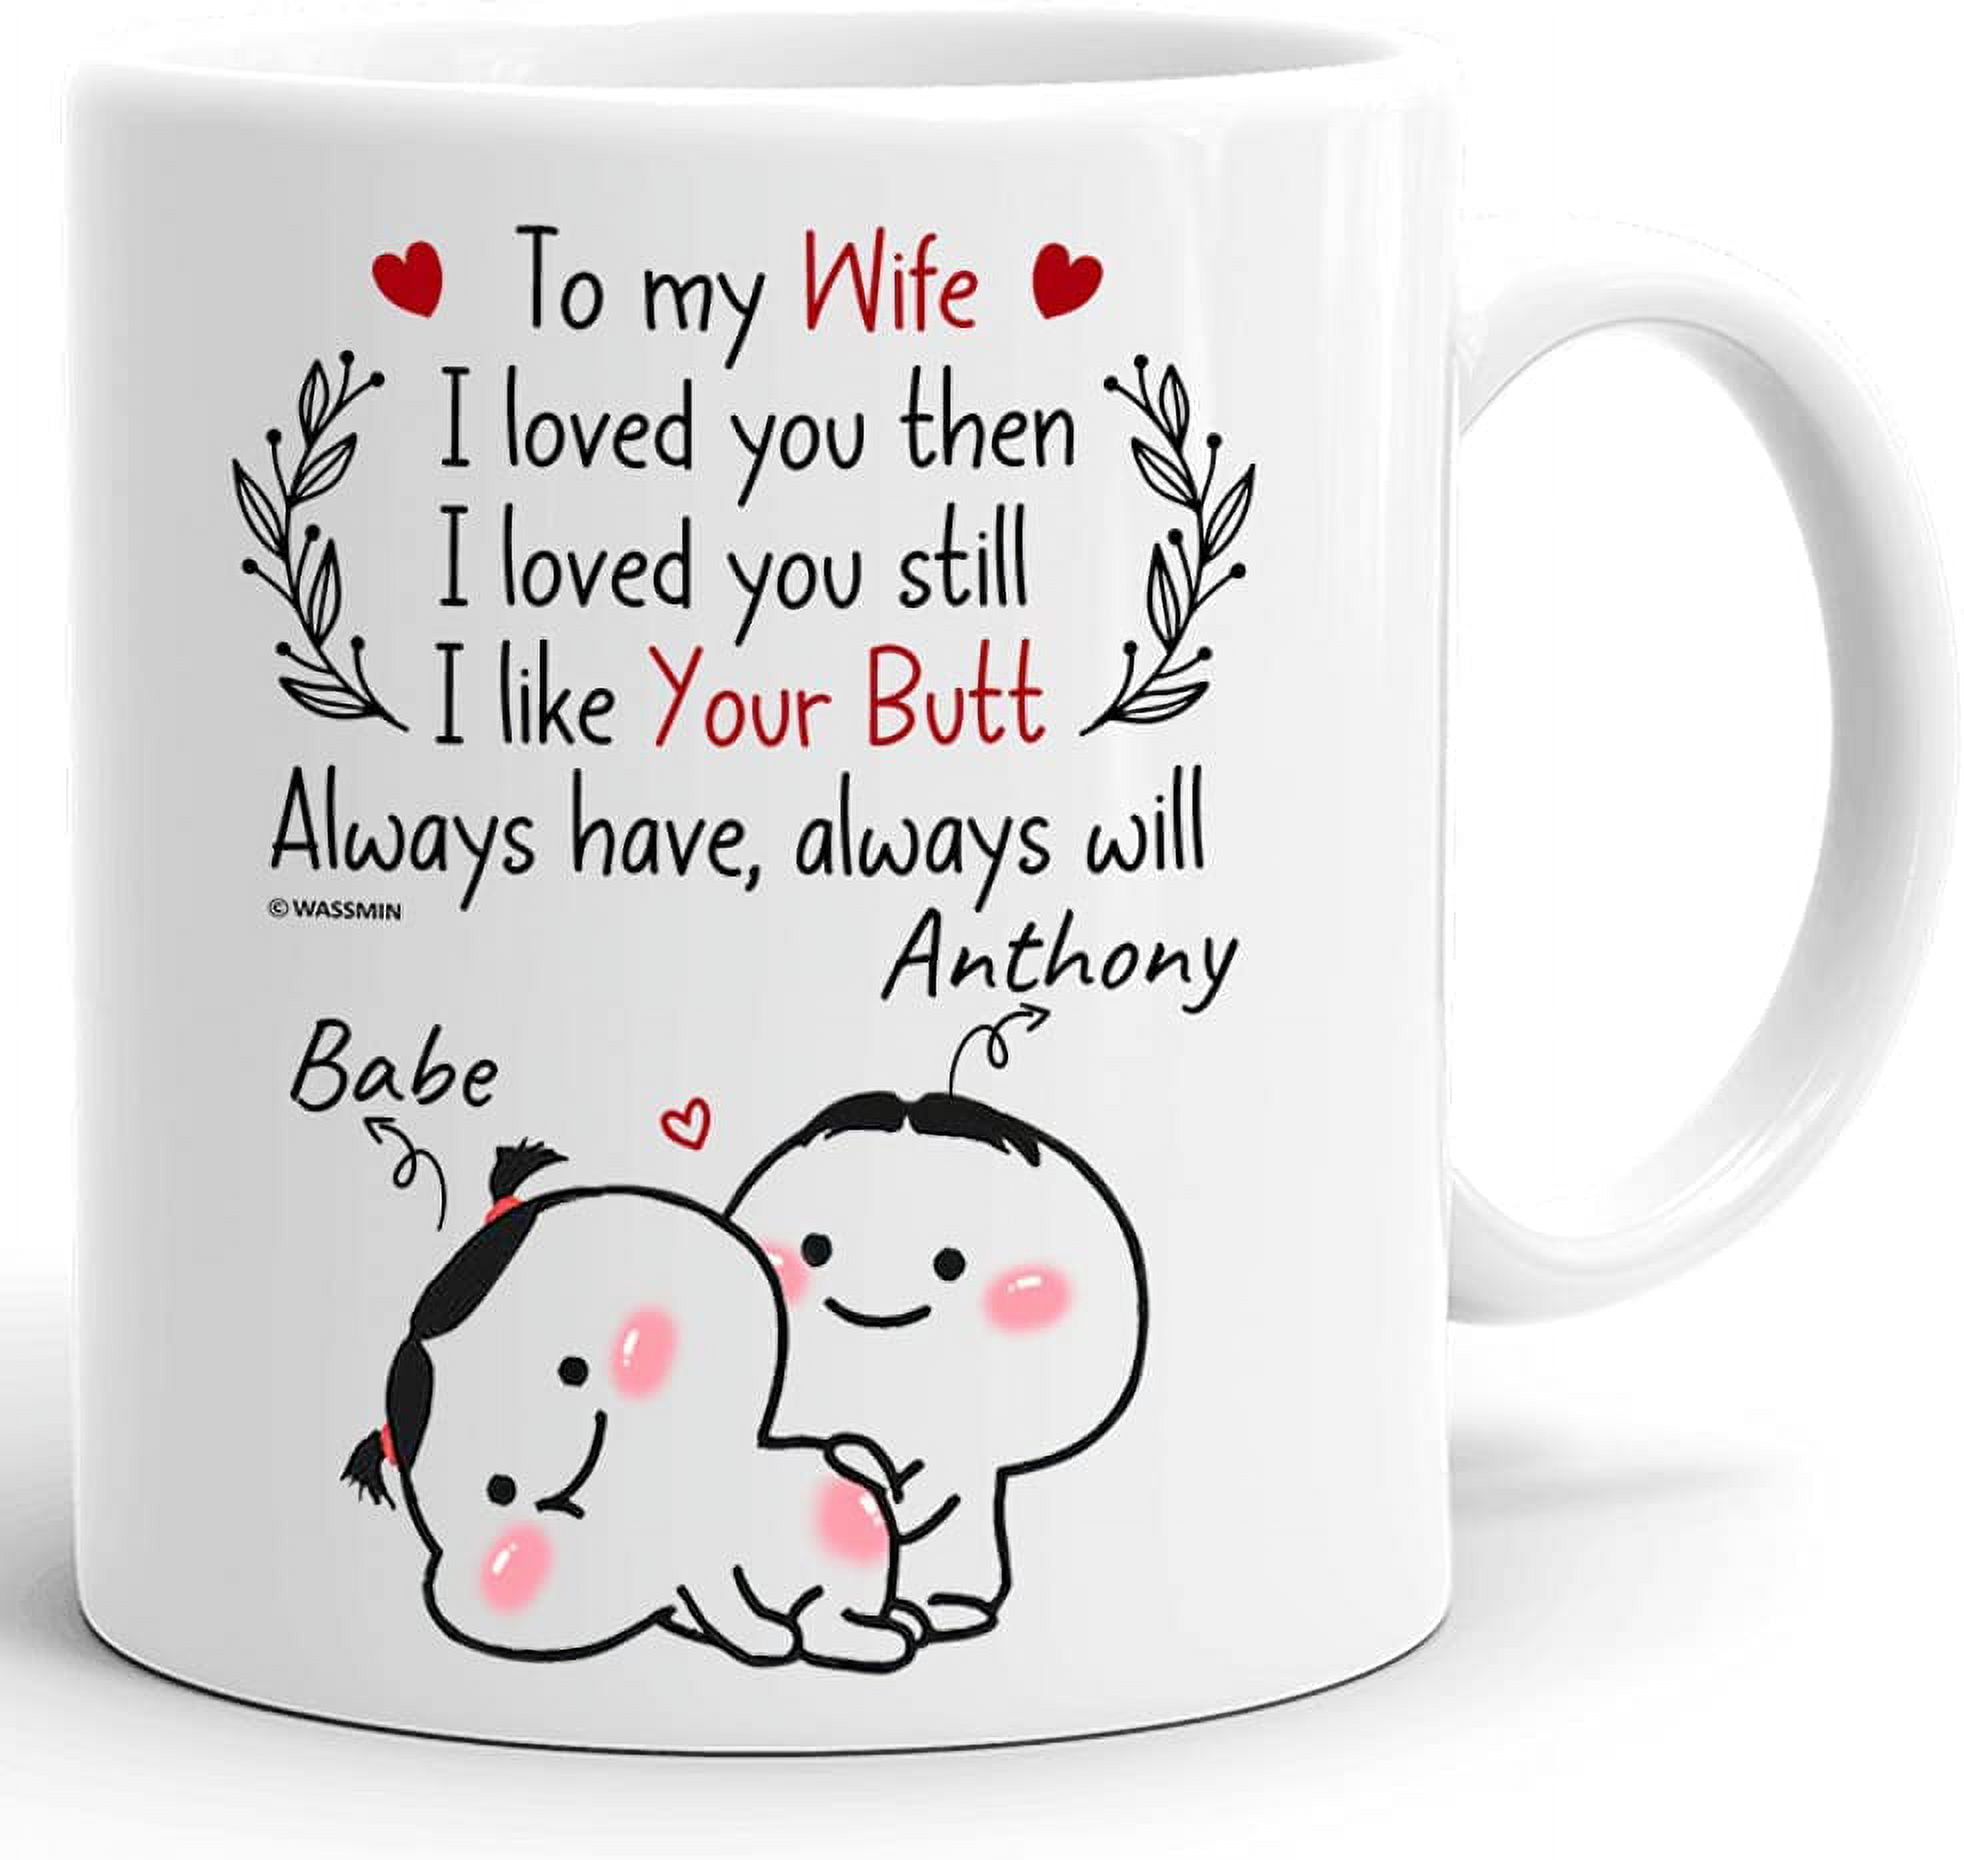  Peohud 2 Pack 14 Oz Couple Coffee Mugs, Wedding Gifts for  Couple Bride and Groom, Porcelain Wifey and Hubby Cups Set for Latte,  Cappuccino, Tea, Bridal Shower and Married Couples Anniversary 